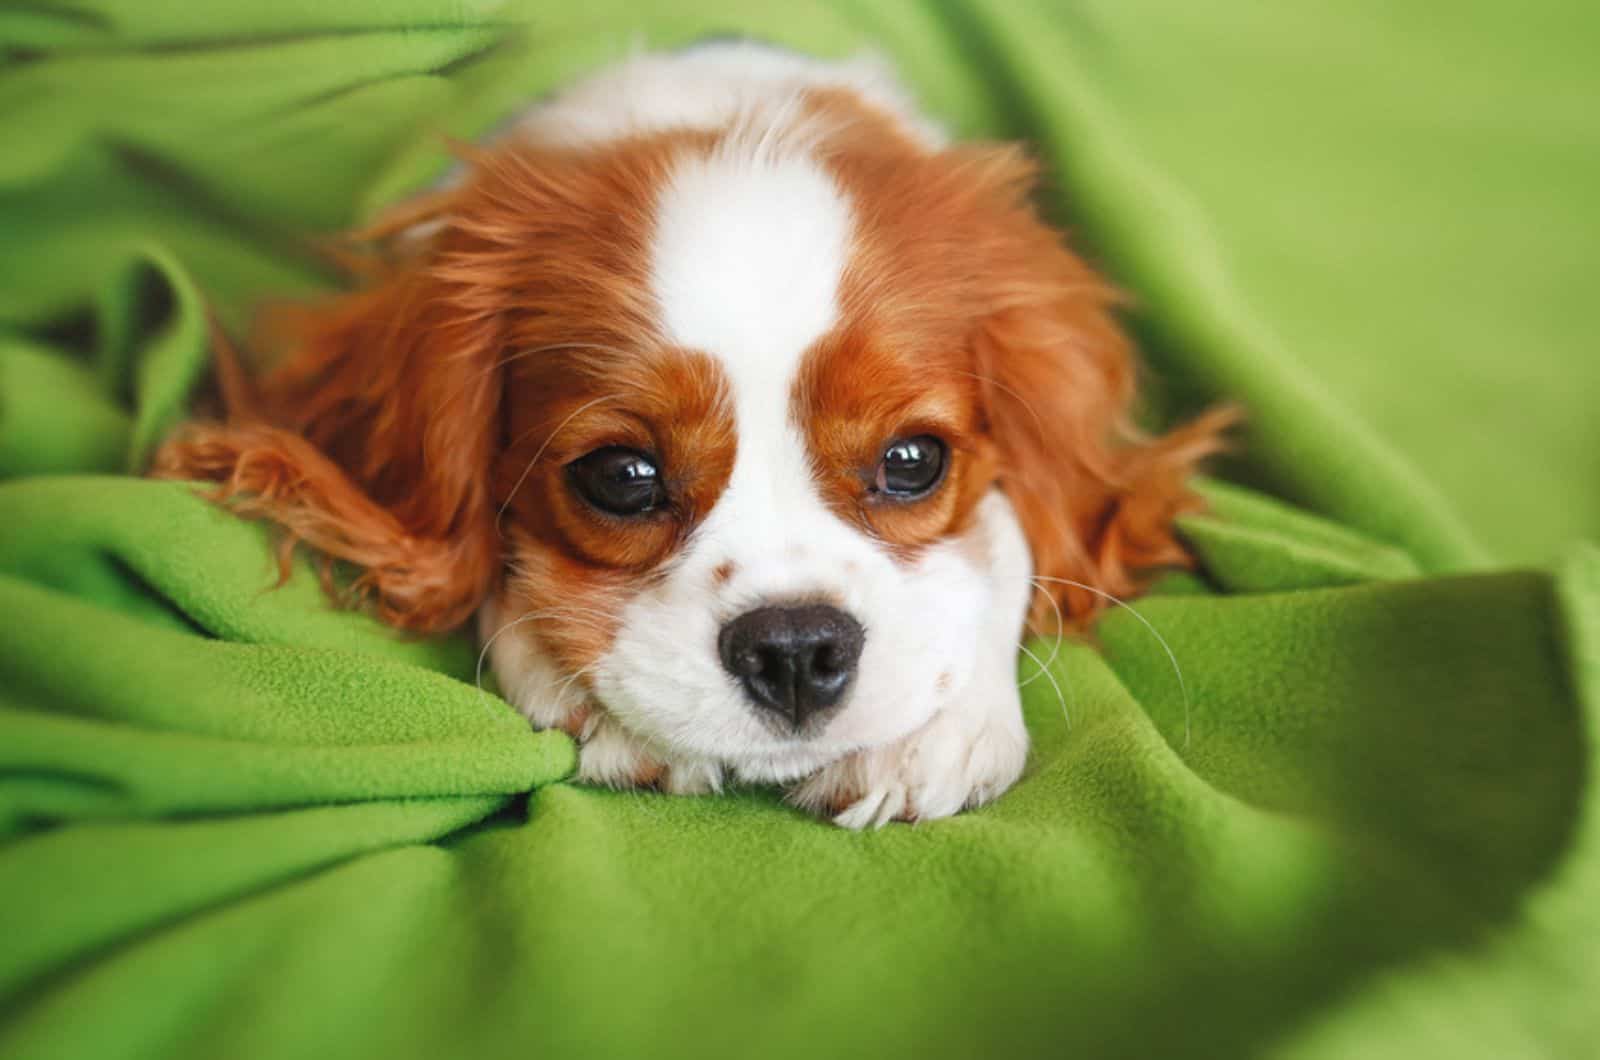 cute cavalier king charles spaniel puppy lying on the green blanket